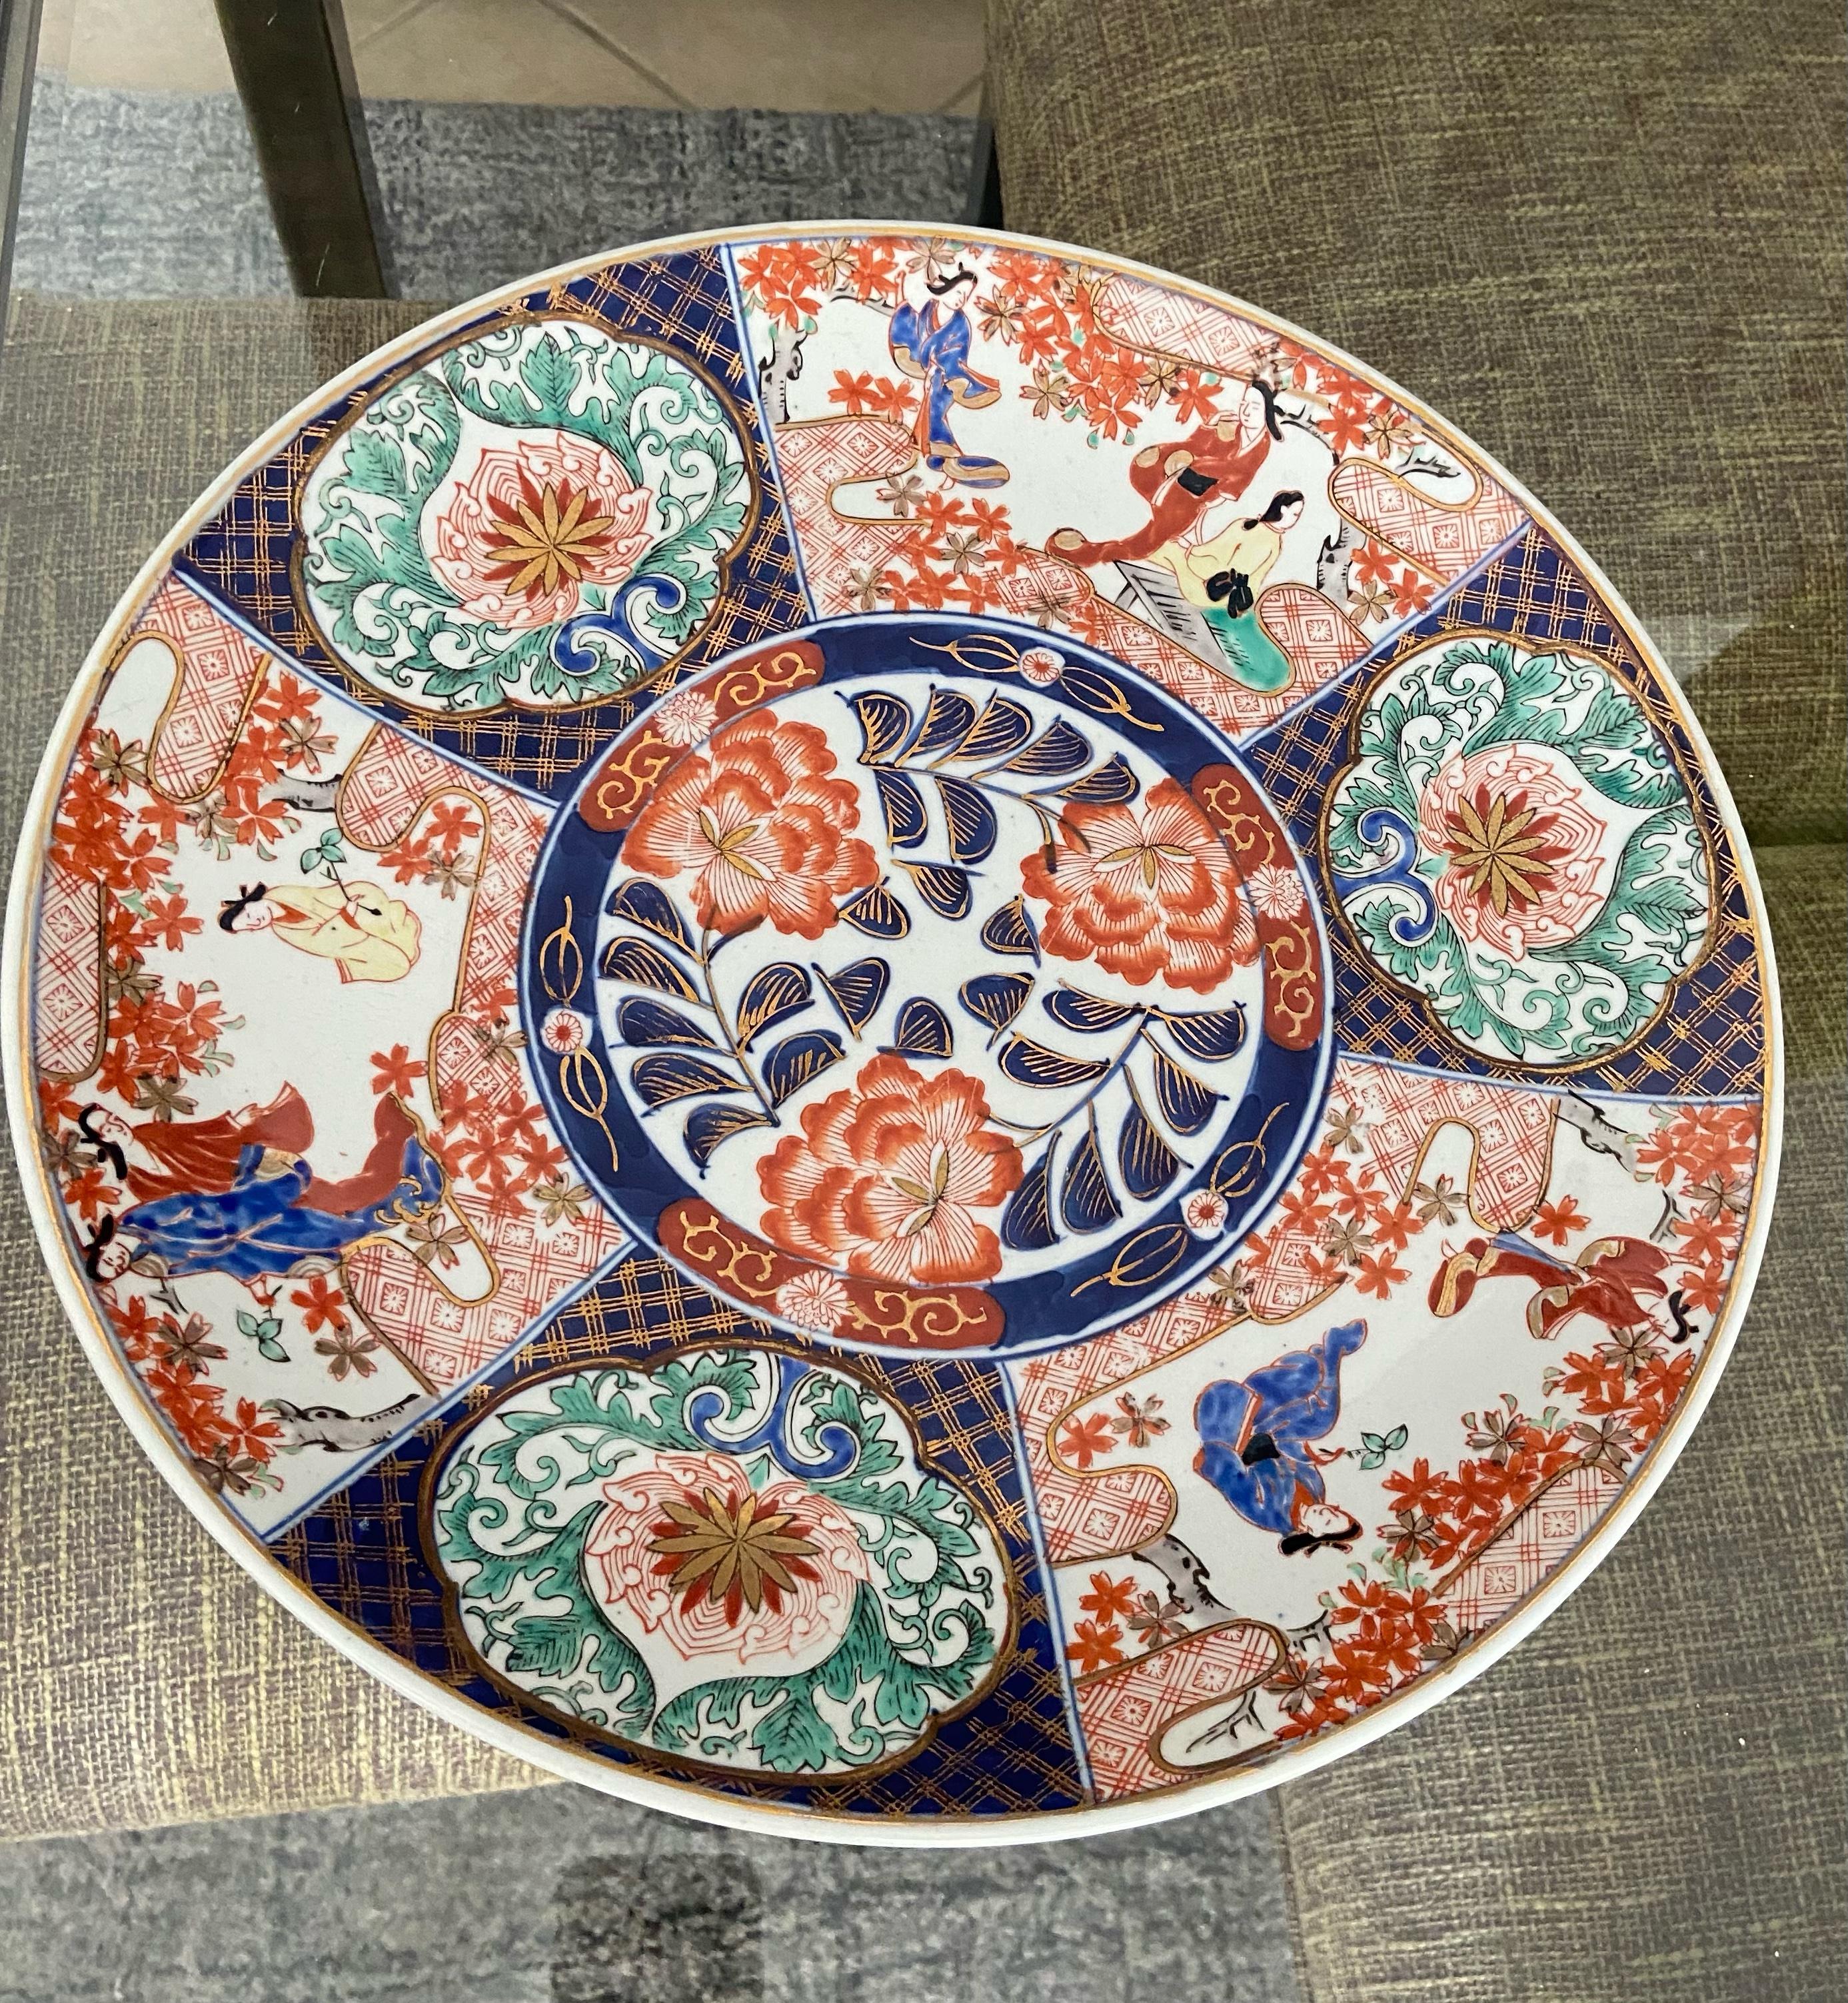 Hand painted porcelain Japanese Imari charger plate with figures and floral motif.